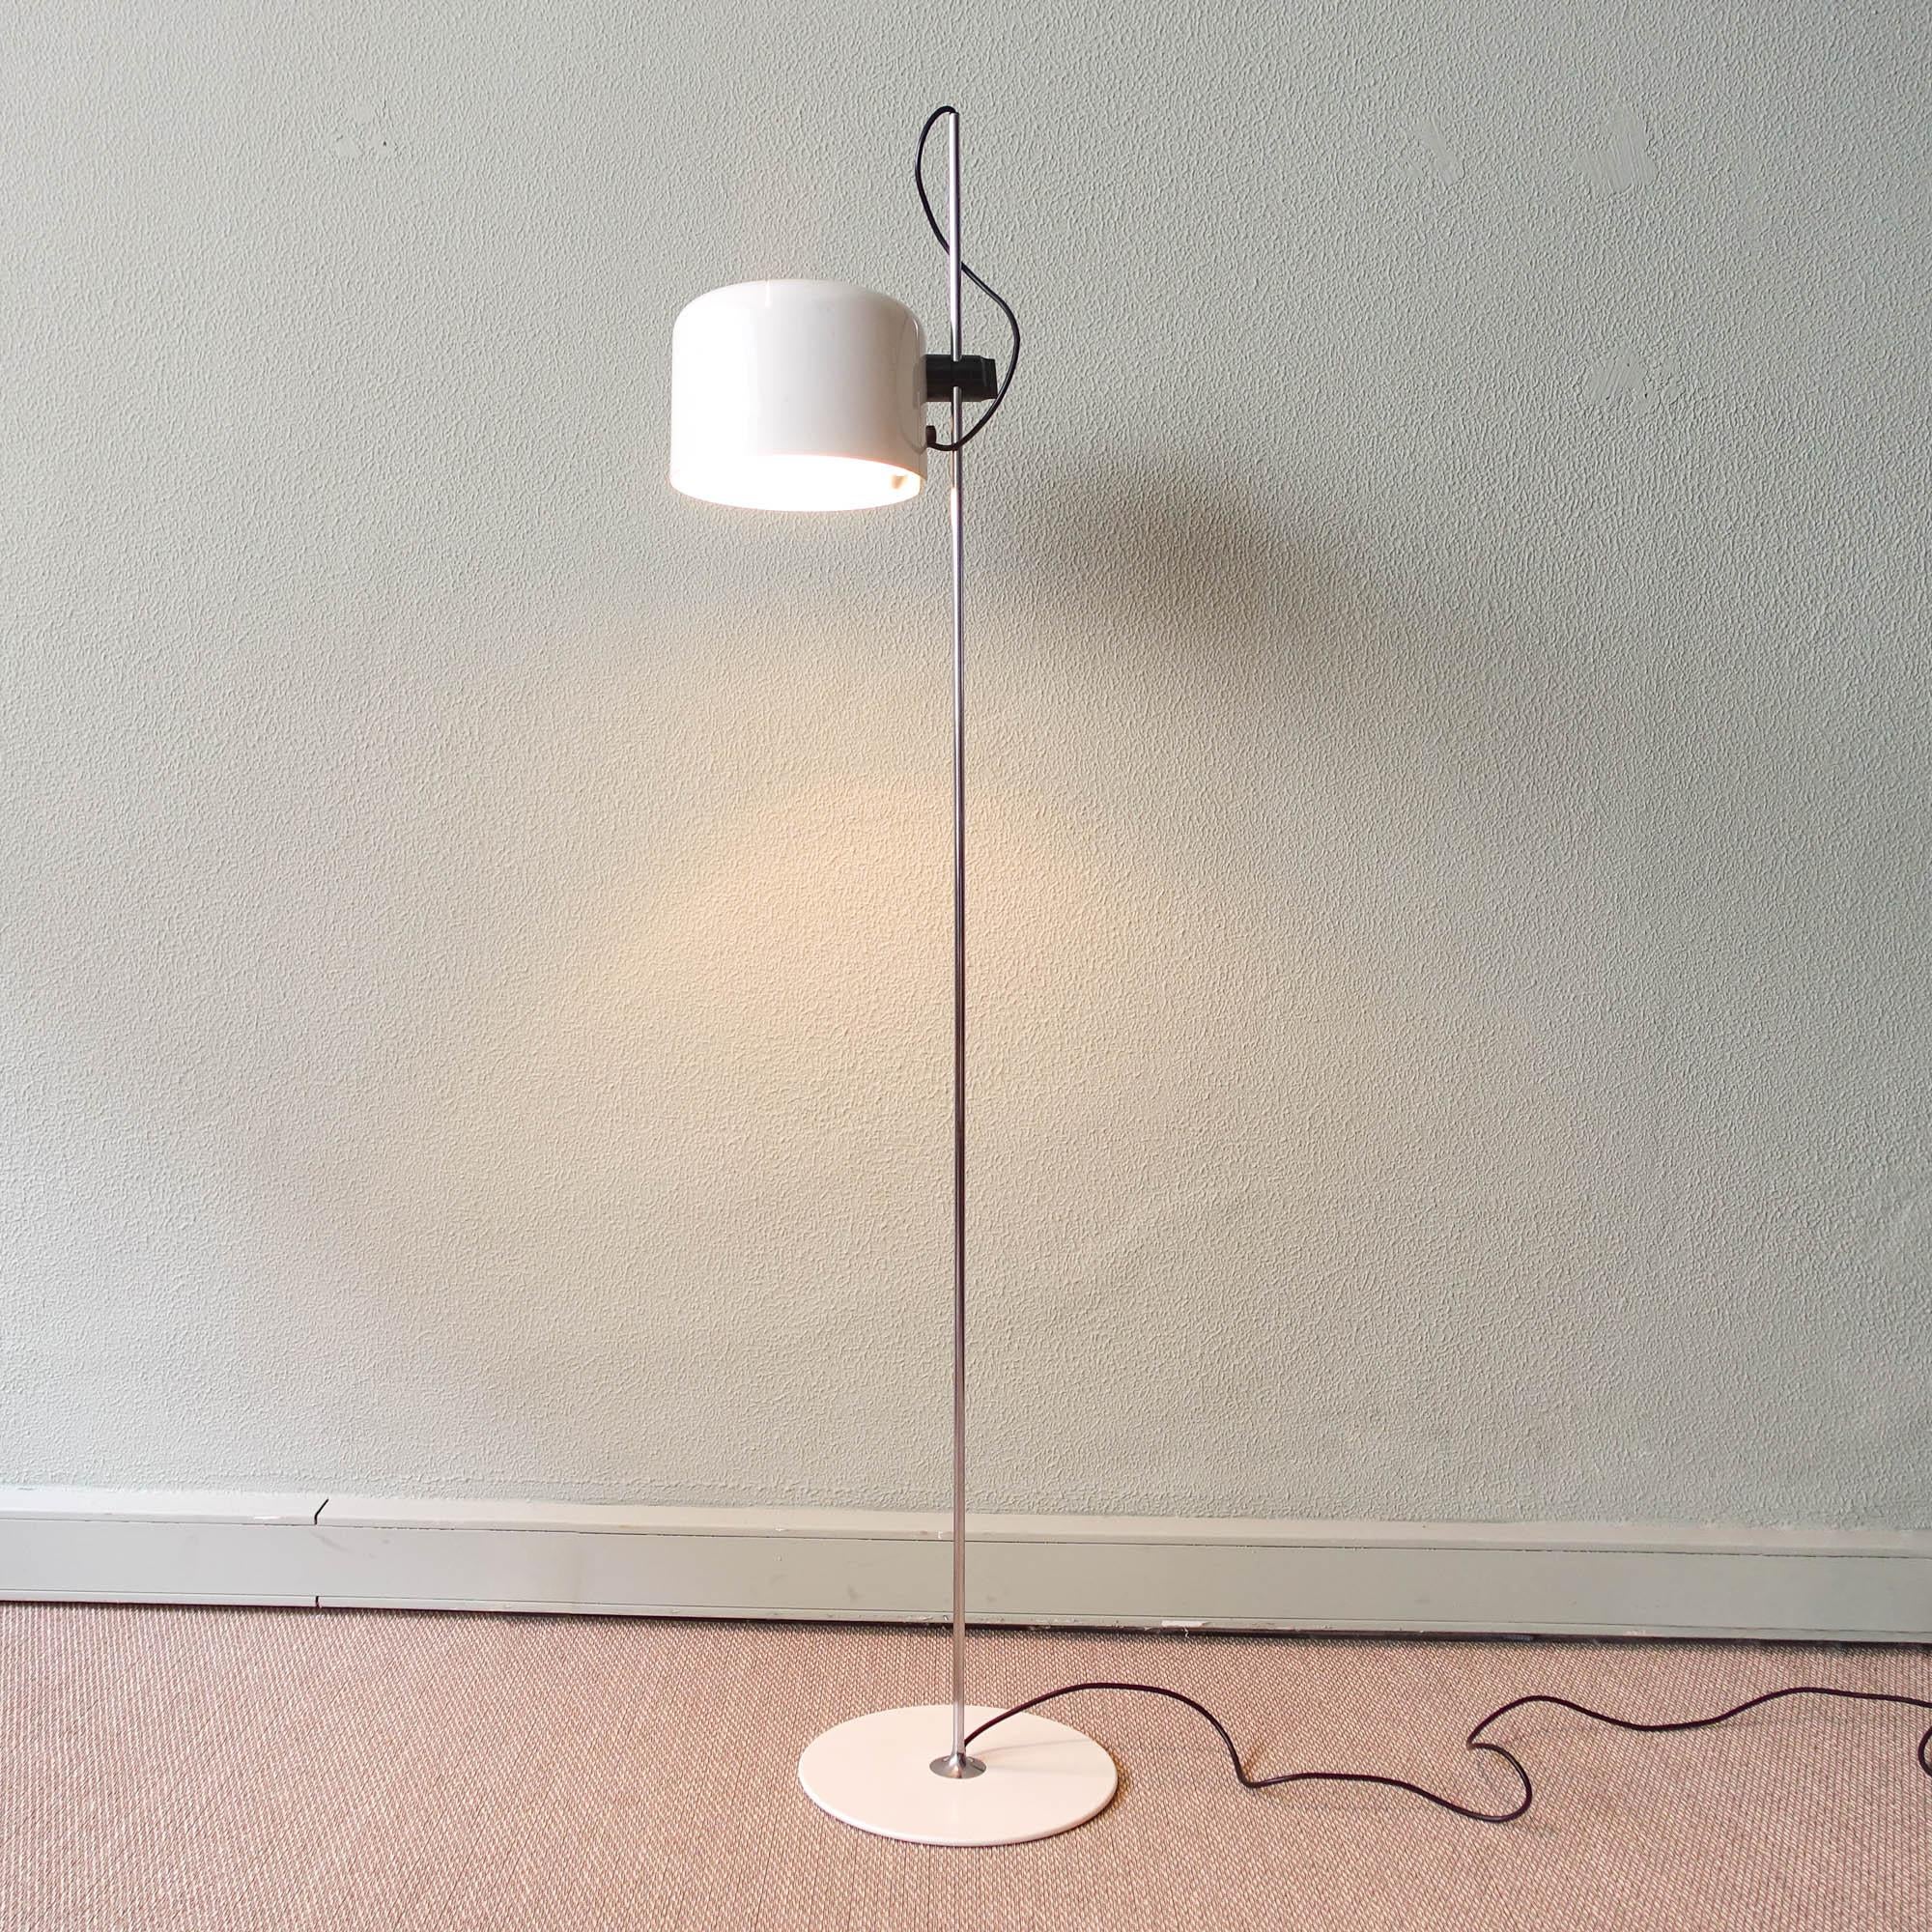 This floor lamp, model 'Coupé' was designed by Joe Colombo for Oluce, in Italy, in 1967. The Coupé series, designed by Colombo, was initially conceived as a variation of the Spider family, created by the same designer, of which it has kept its base